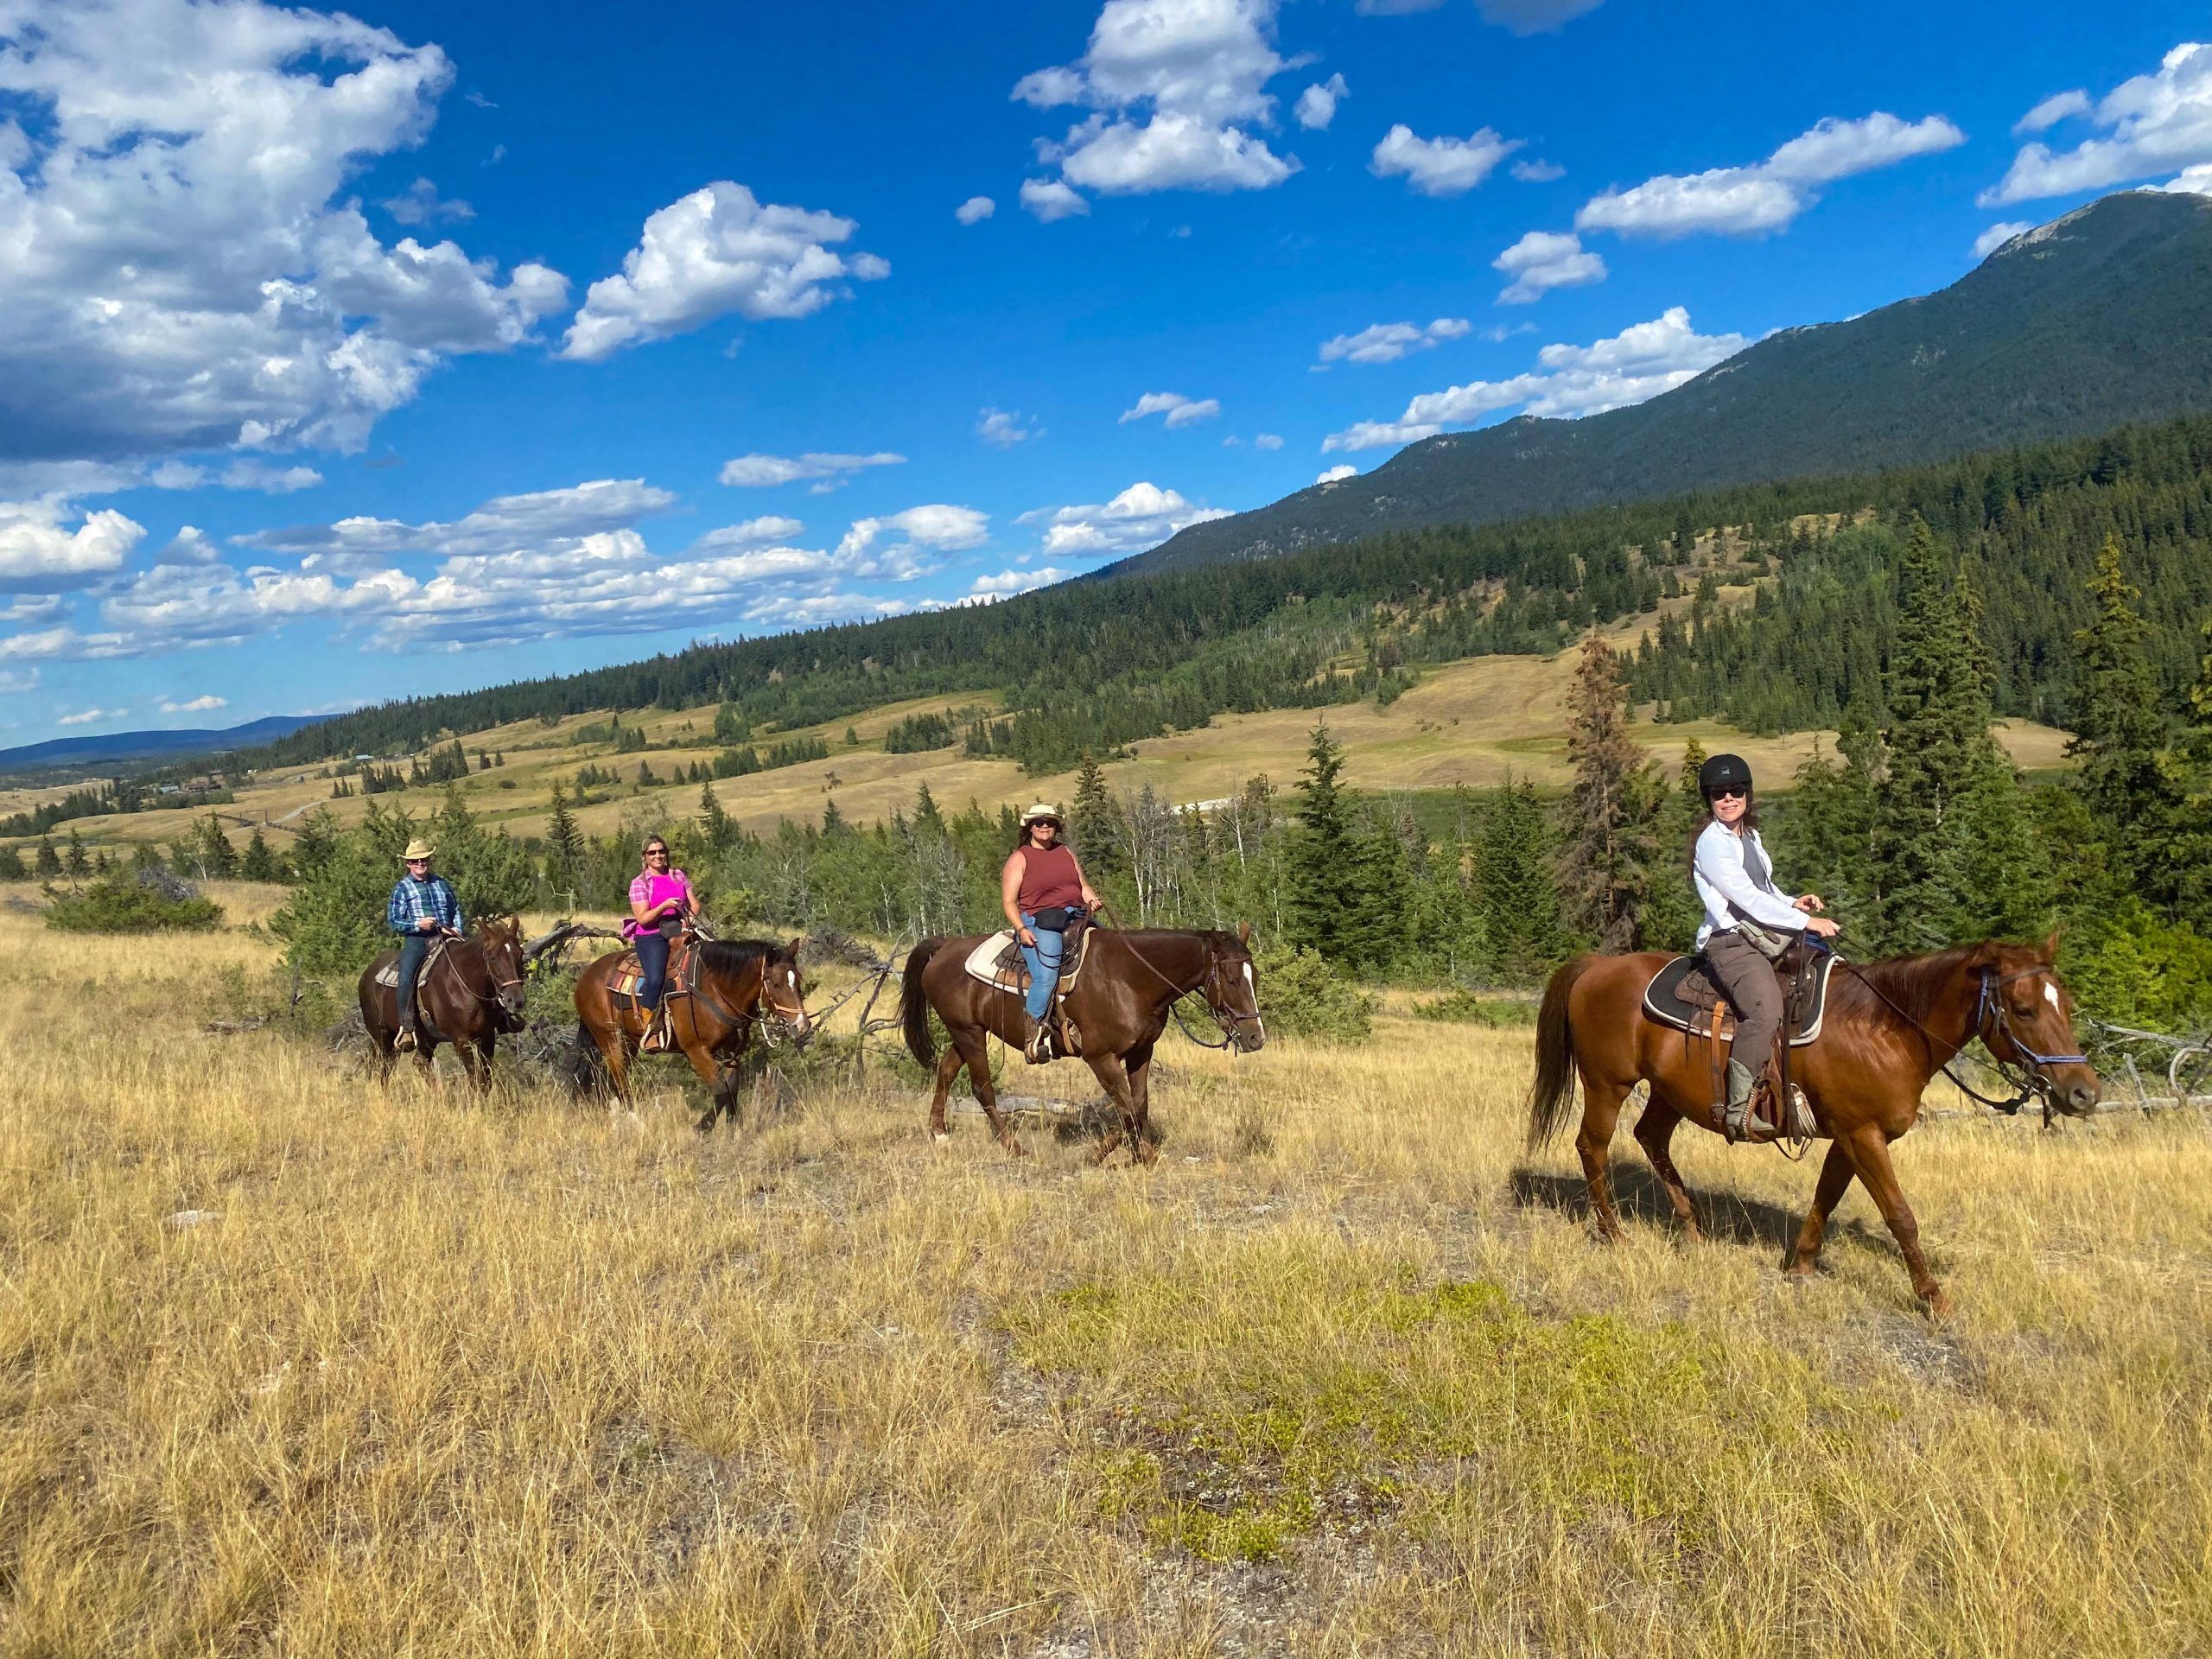 Olsen: Original ranch culture lives on in B.C.’s Cariboo and Chilcotin ...